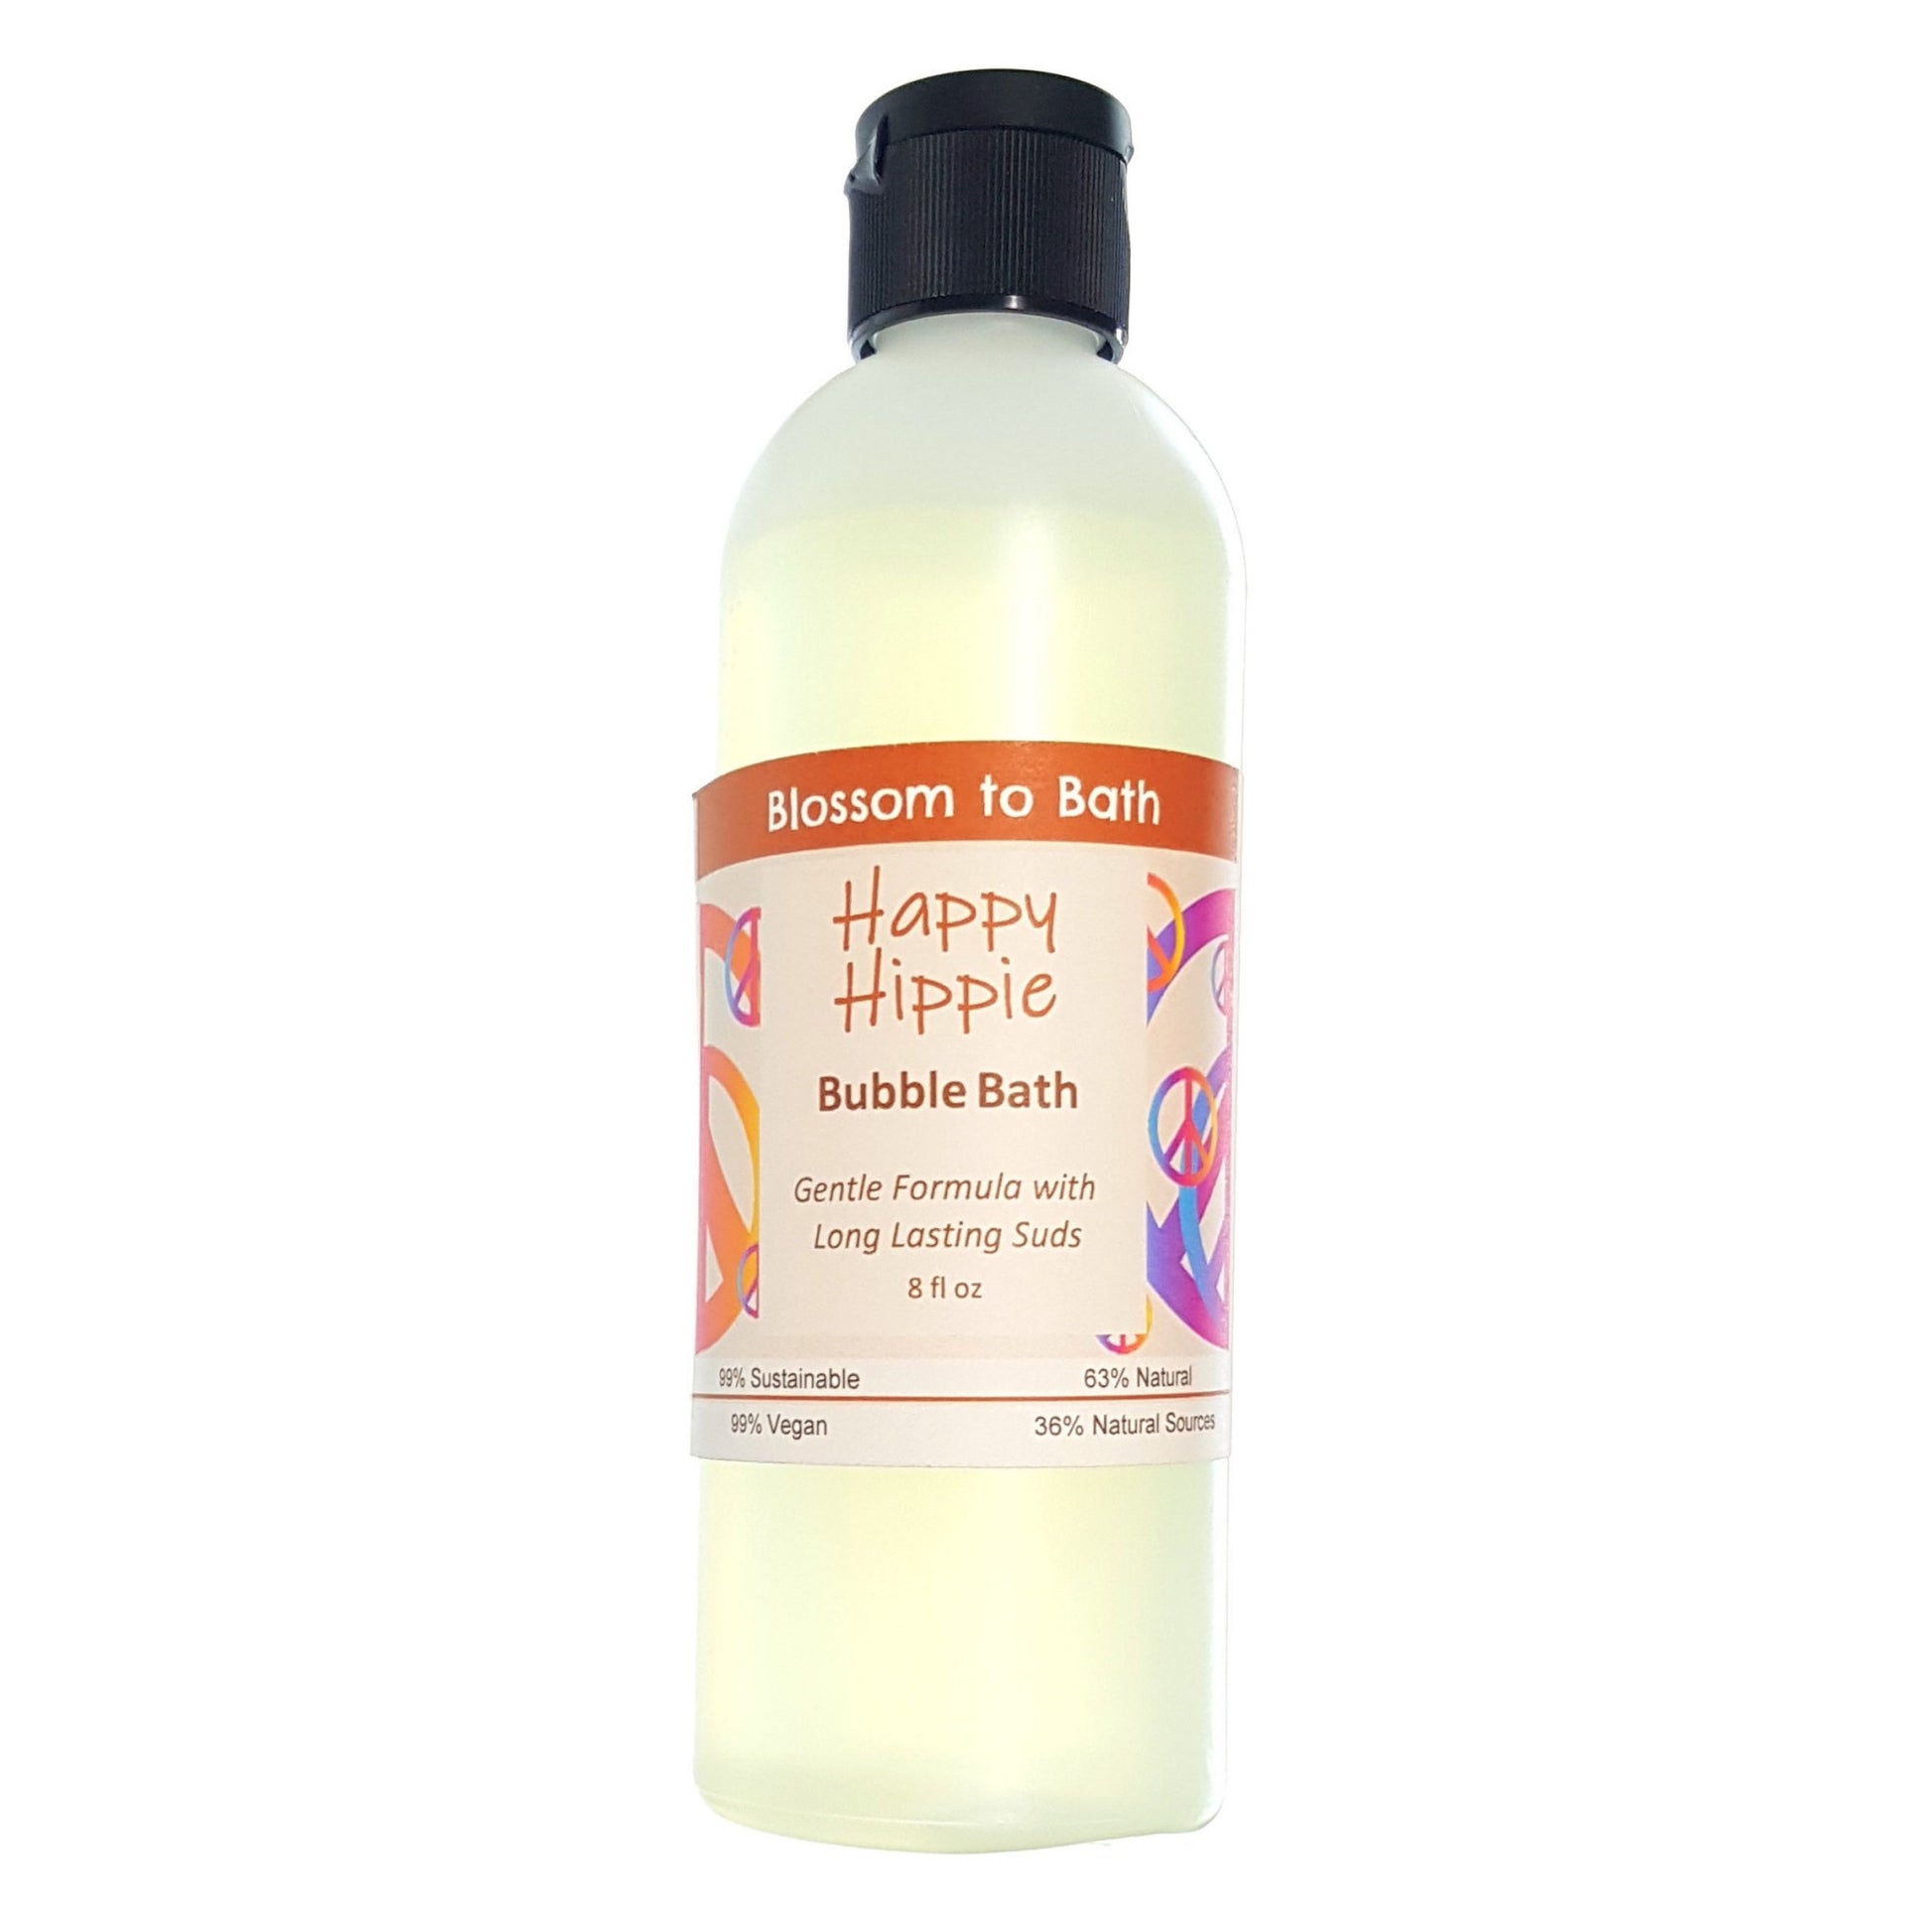 Buy Blossom to Bath Happy Hippie Bubble Bath from Flowersong Soap Studio.  Lively, long lasting luxury bubbles in a gentle plant based formula for maximum relaxation time  A refreshing herbal fragrance that elevates your mood and your perspective.